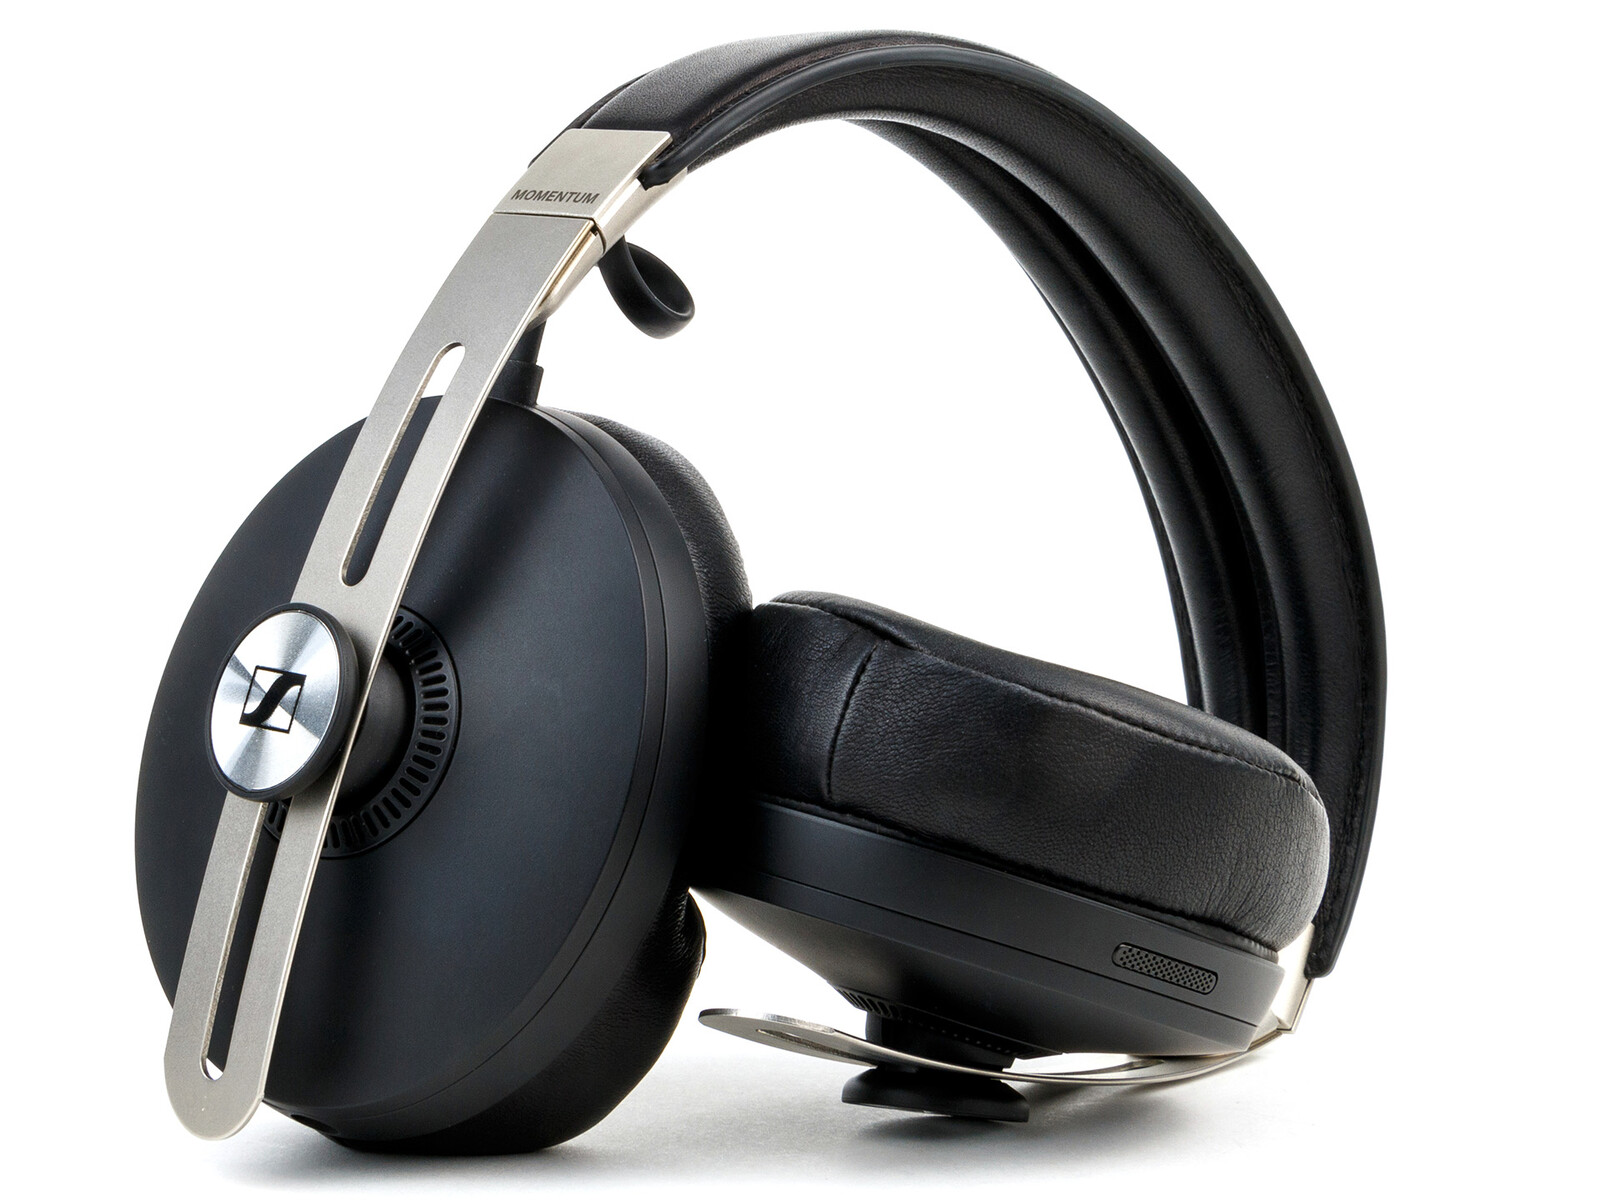 How To Turn Off Noise Cancellation Sennheiser Momentum Wireless